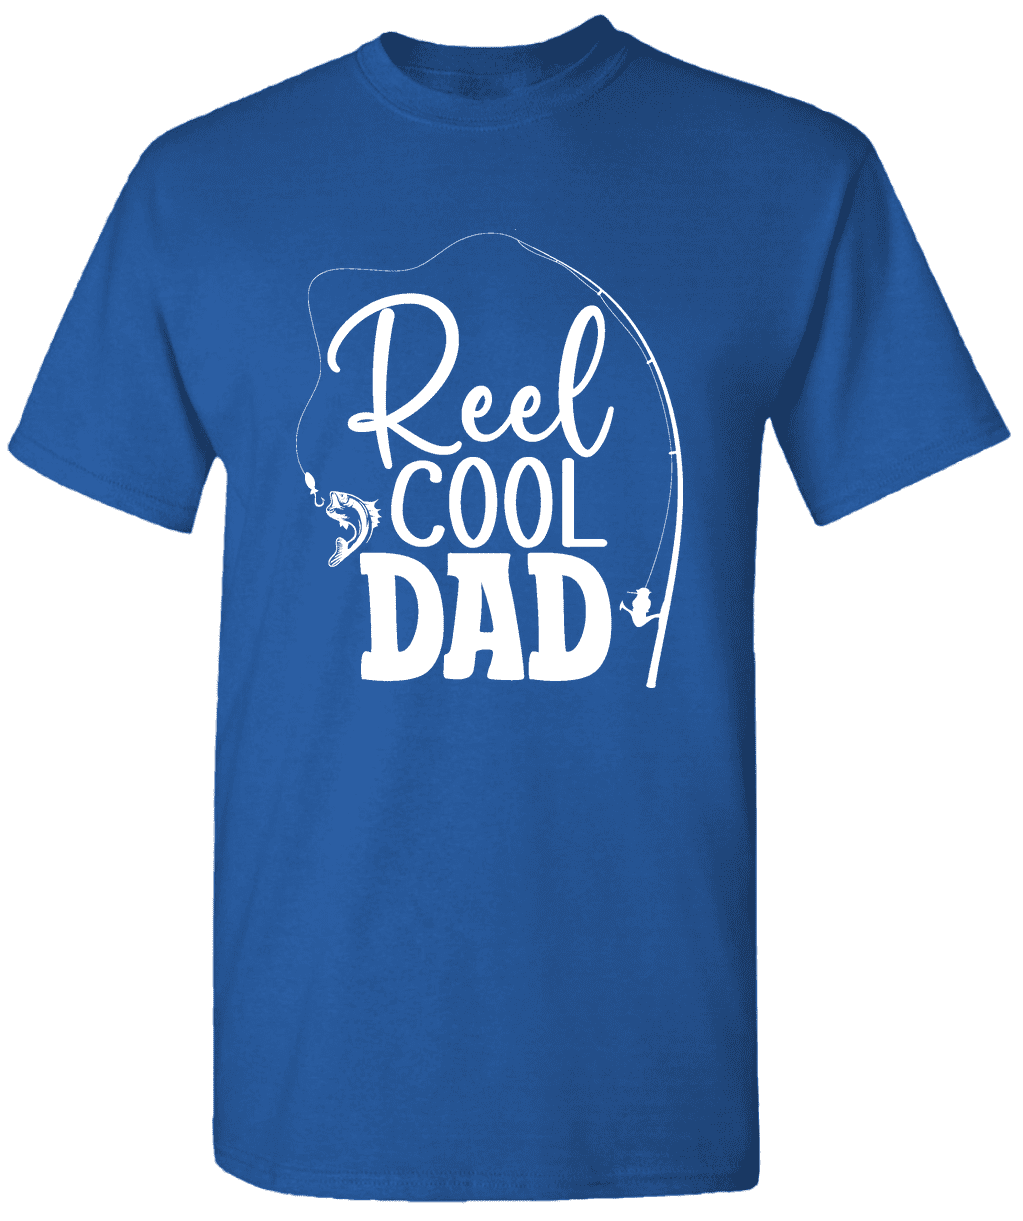  Mens Retro Reel Cool Grandpa Fishing Funny Fathers Day T-Shirt  : Clothing, Shoes & Jewelry